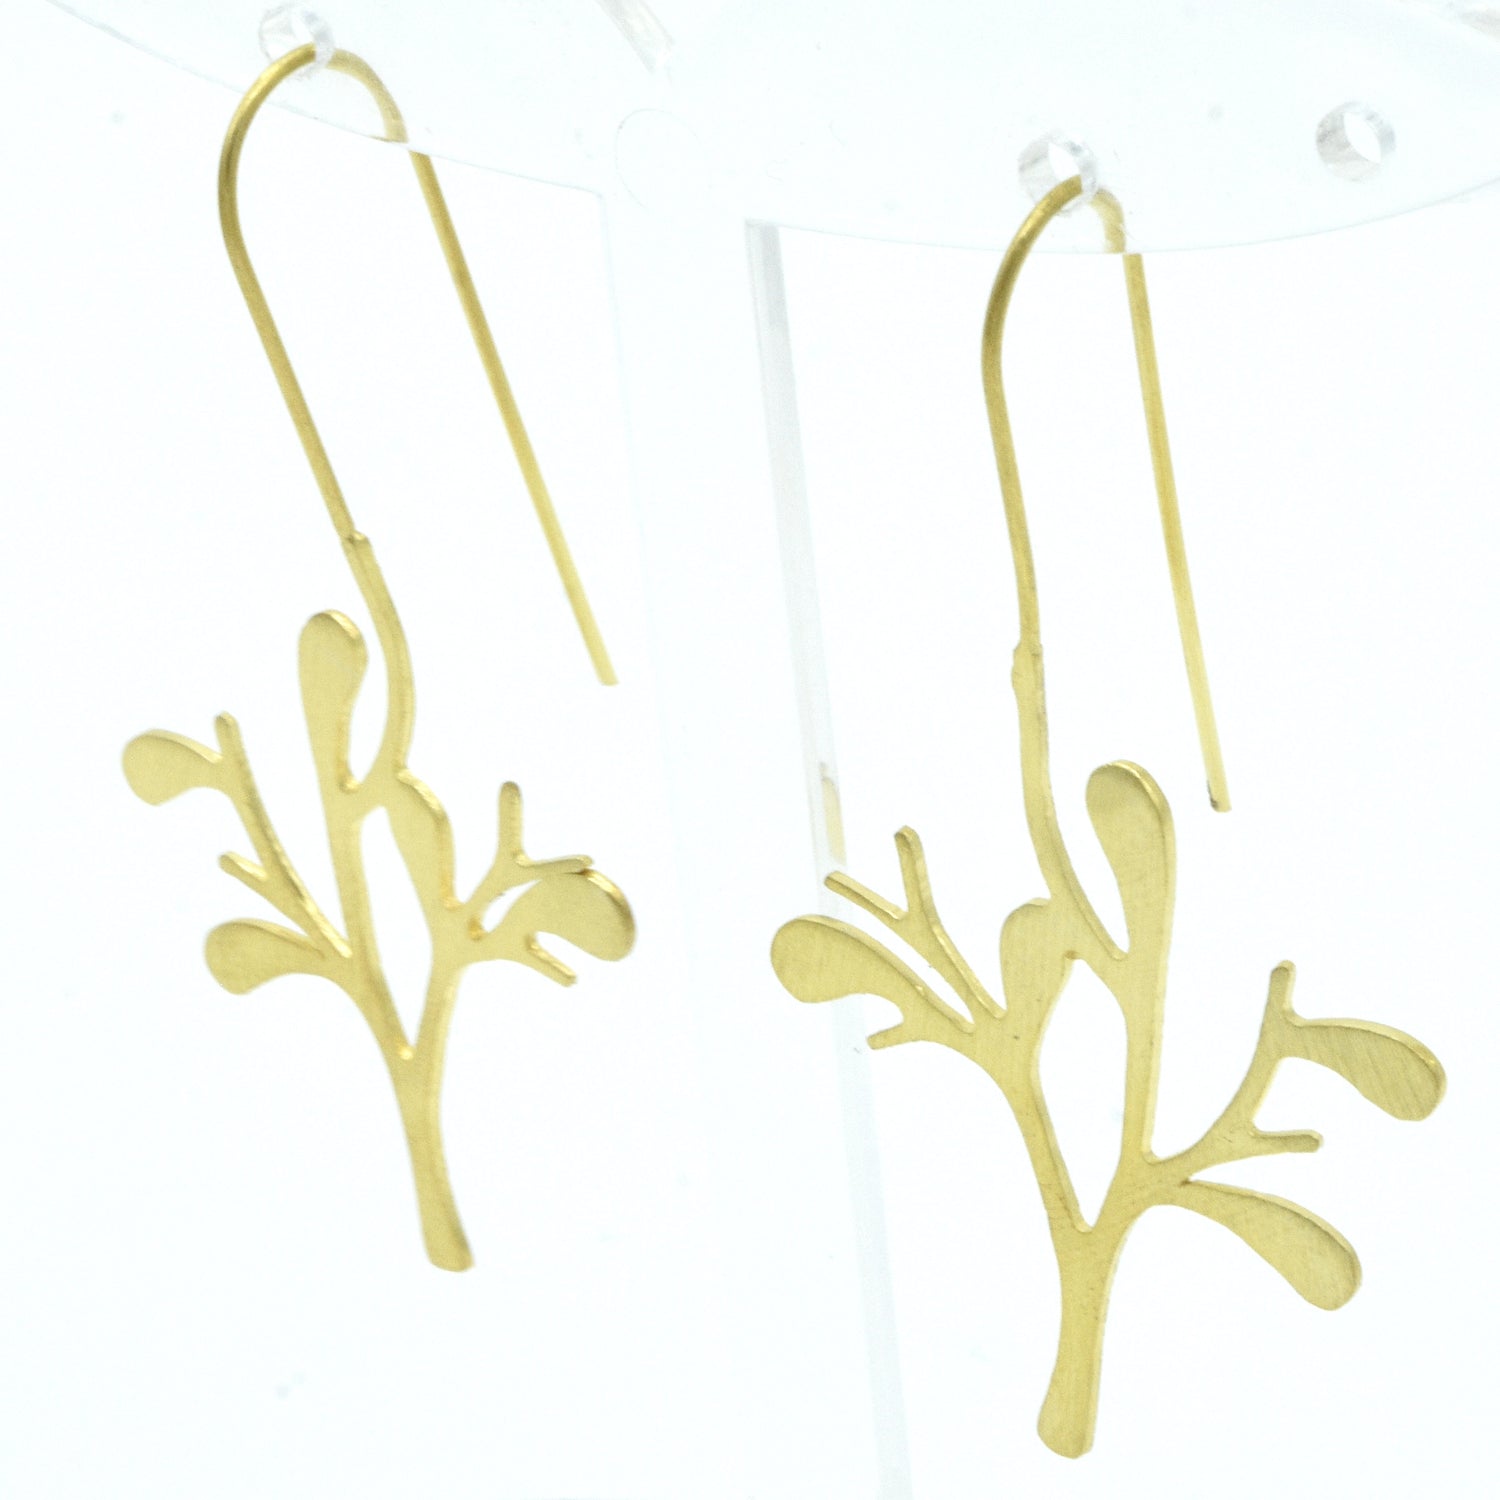 Aylas Tree earrings - 21ct Gold plated 925 Silver- Handmade in Ottoman style